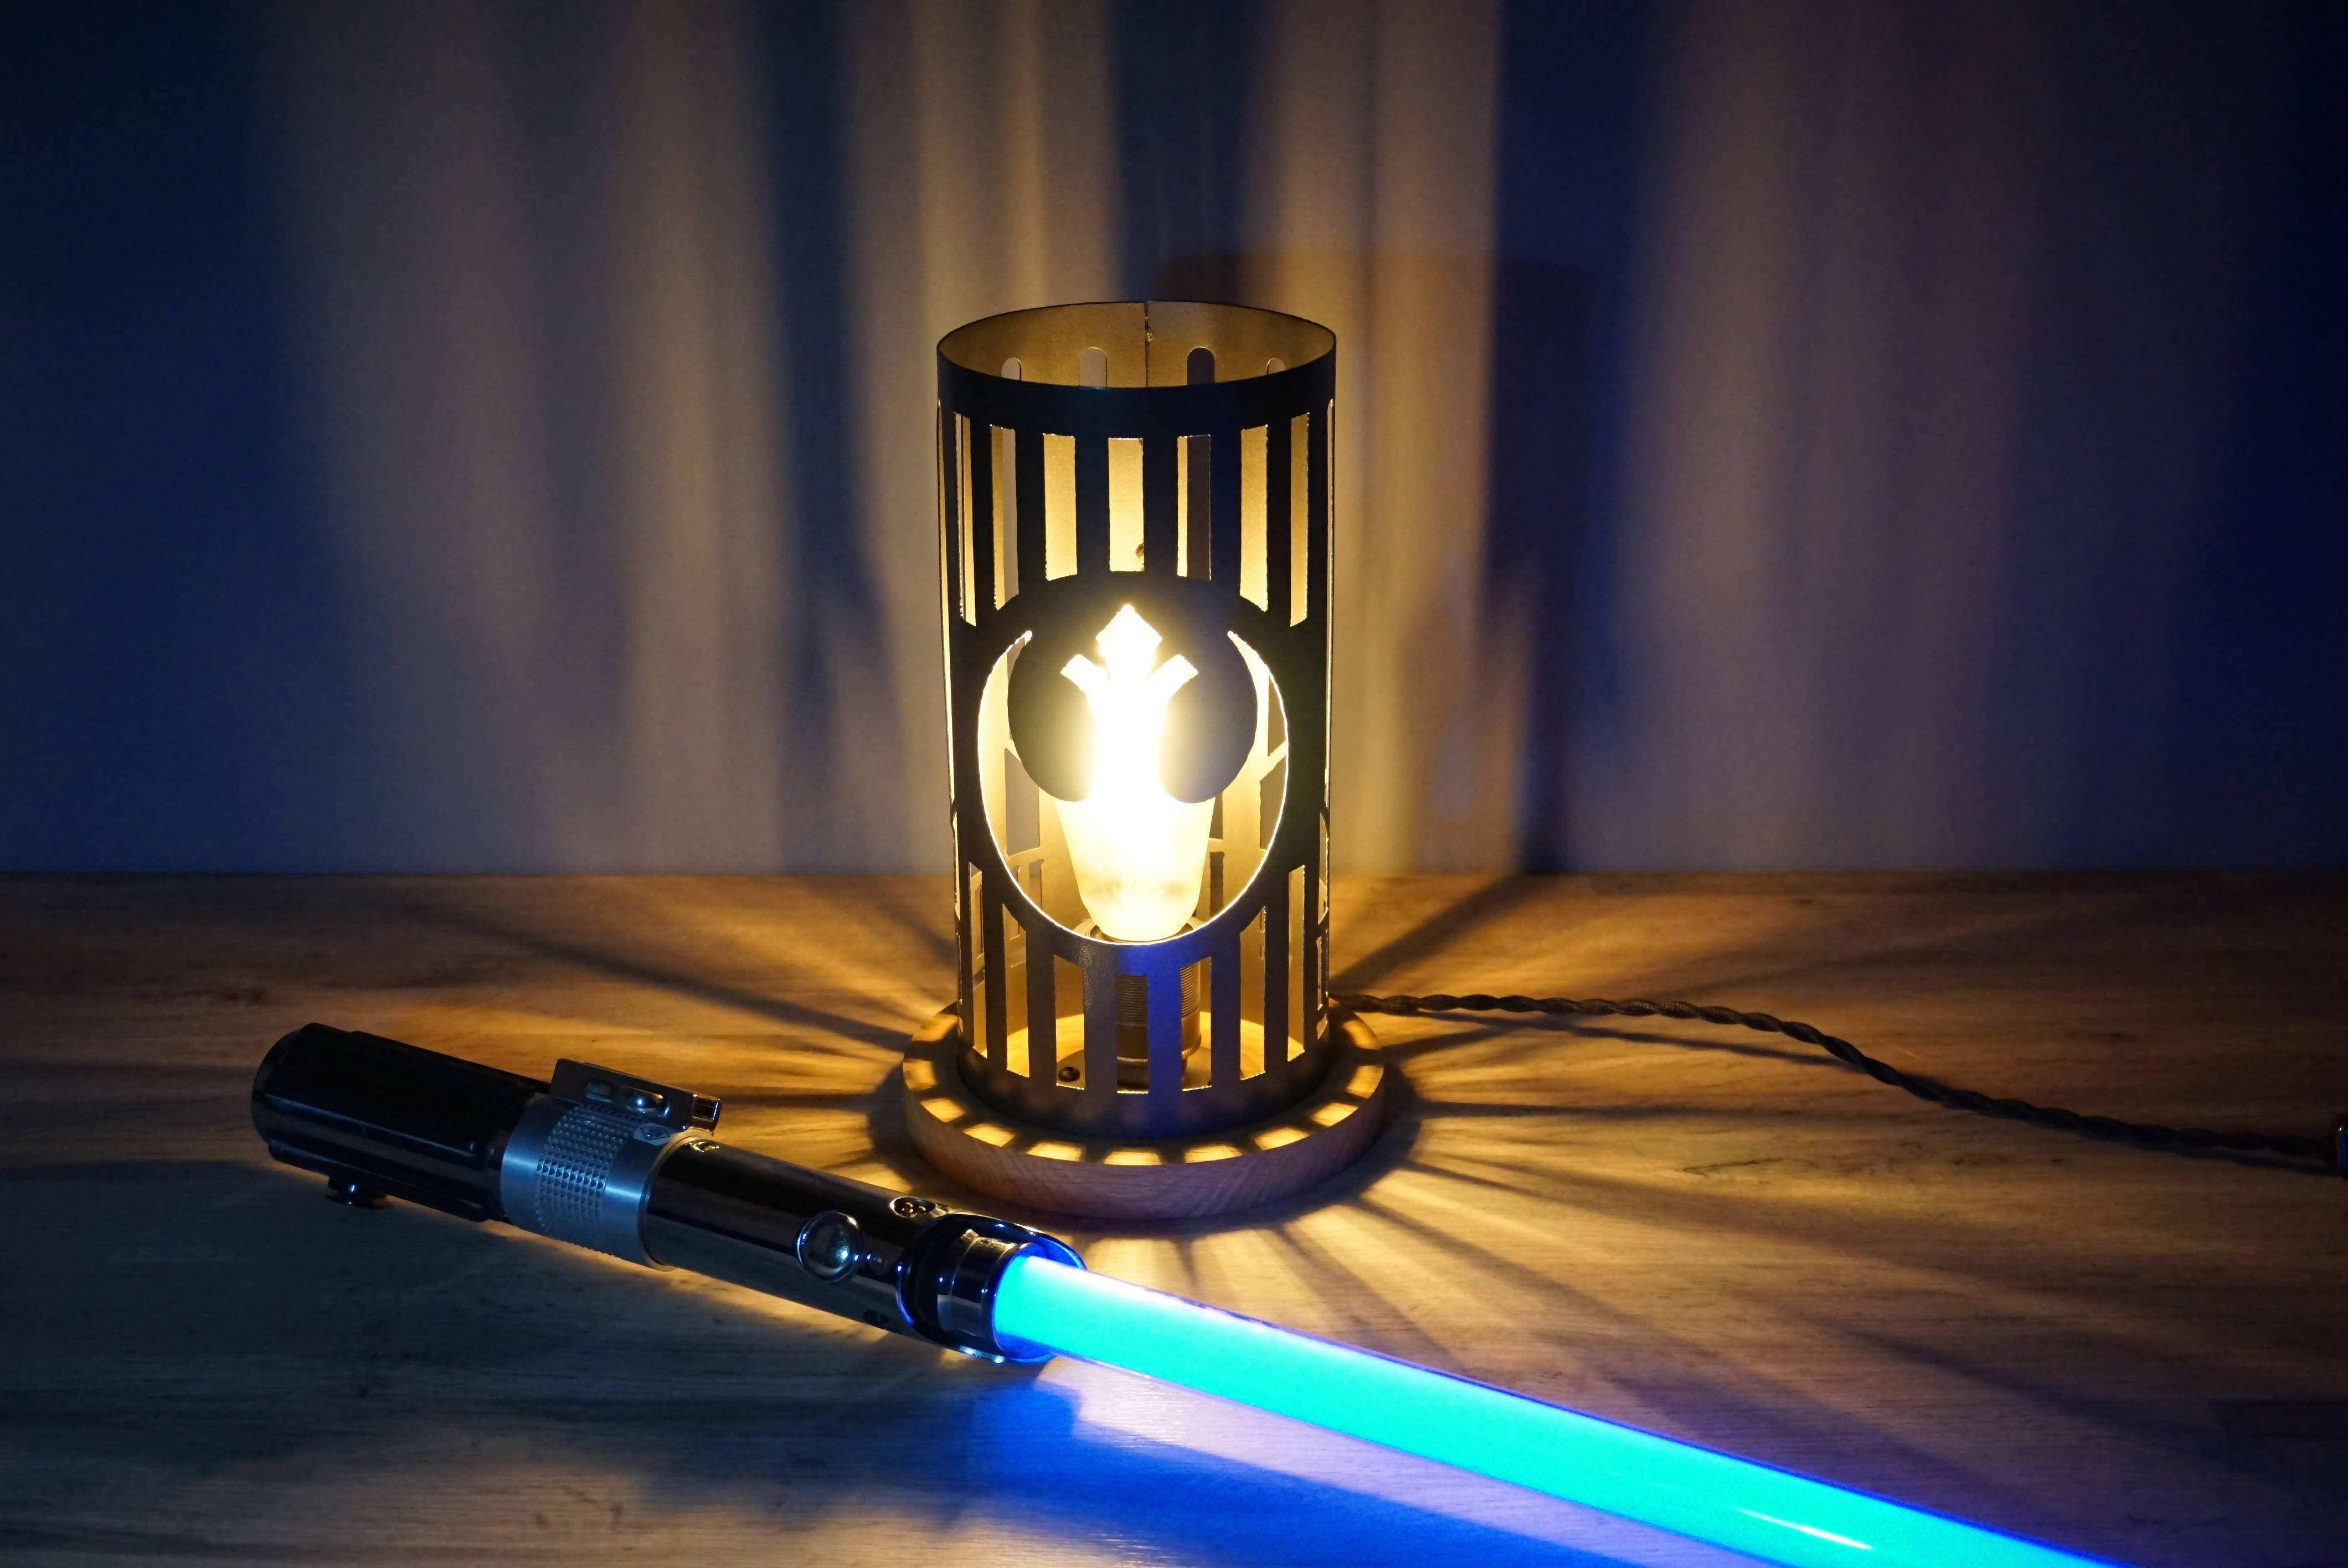 Movie Inspired Table Lamp